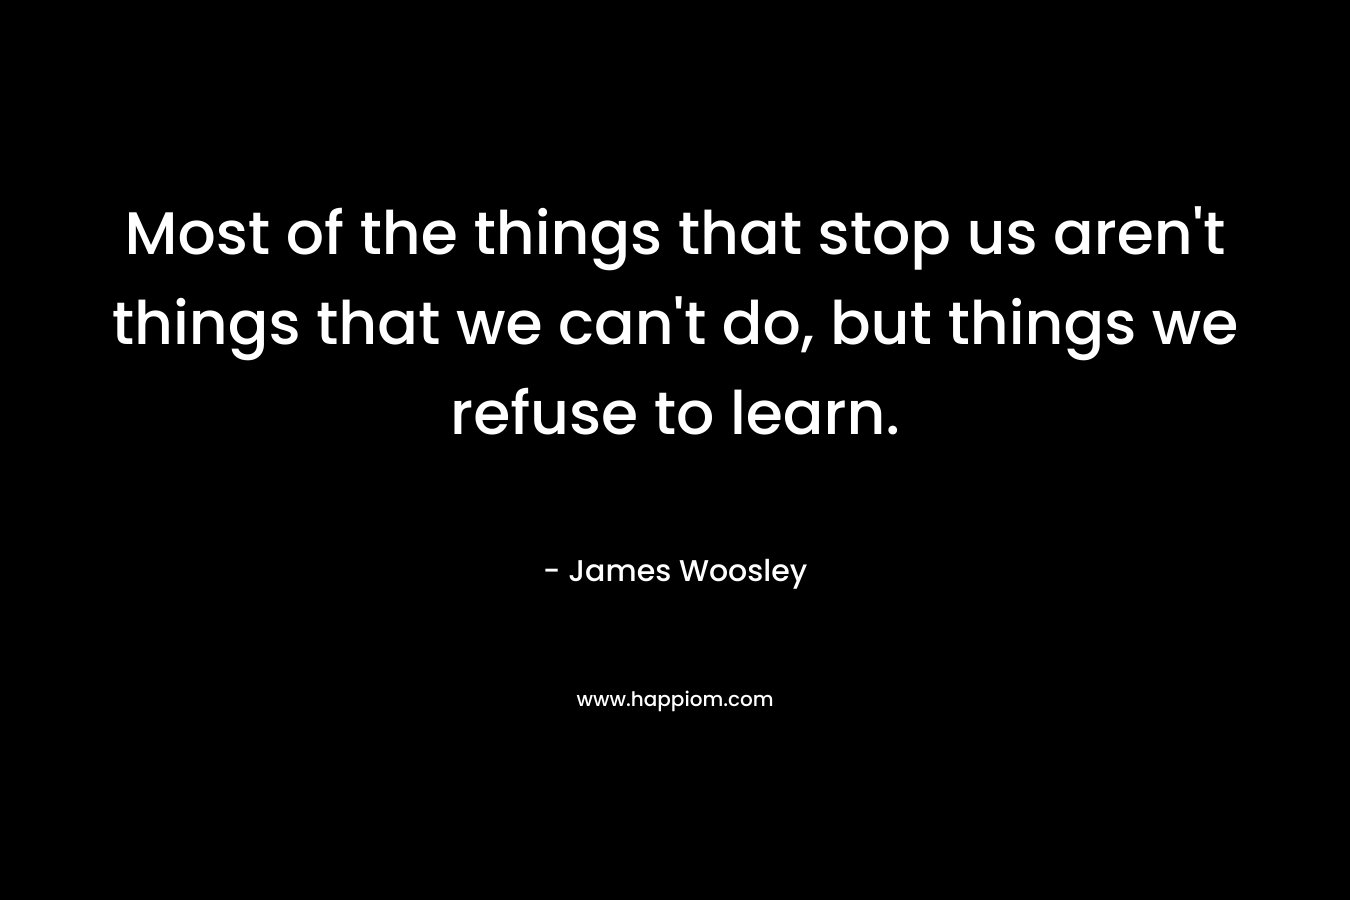 Most of the things that stop us aren’t things that we can’t do, but things we refuse to learn. – James Woosley